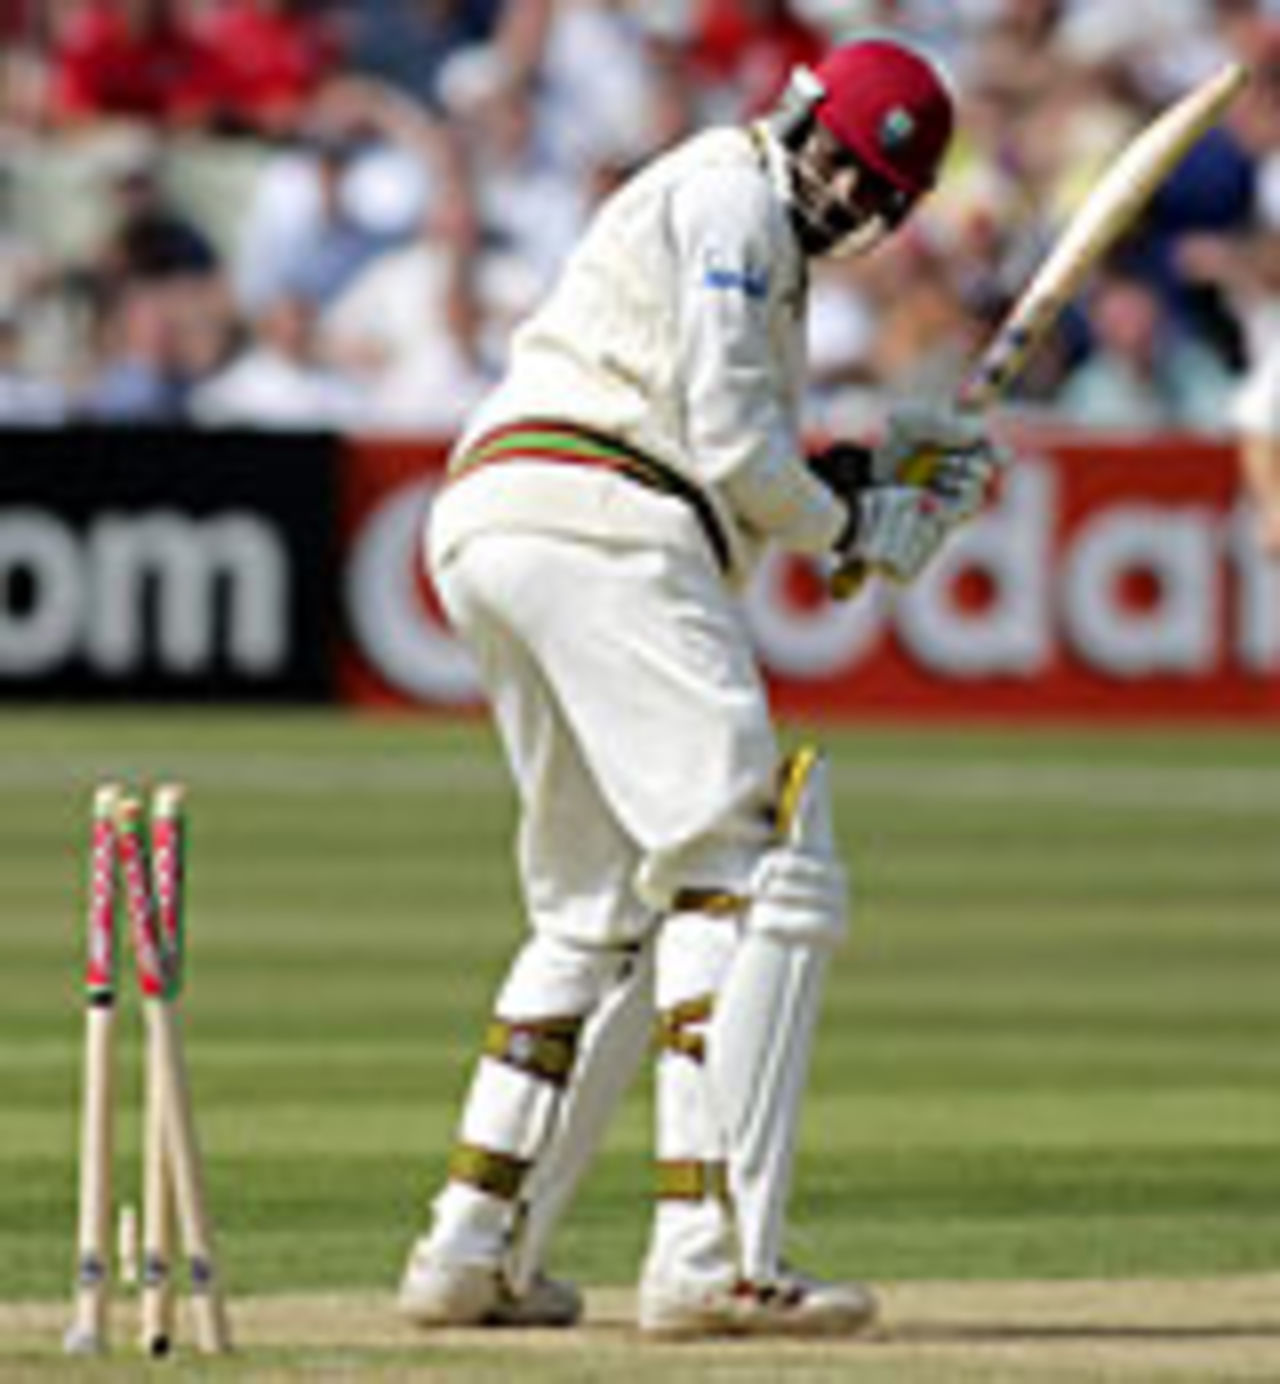 Chris Gayle bowled by Matthew Hoggard for 7, England v West Indies, 2nd Test, Edgbaston, July 30, 2004